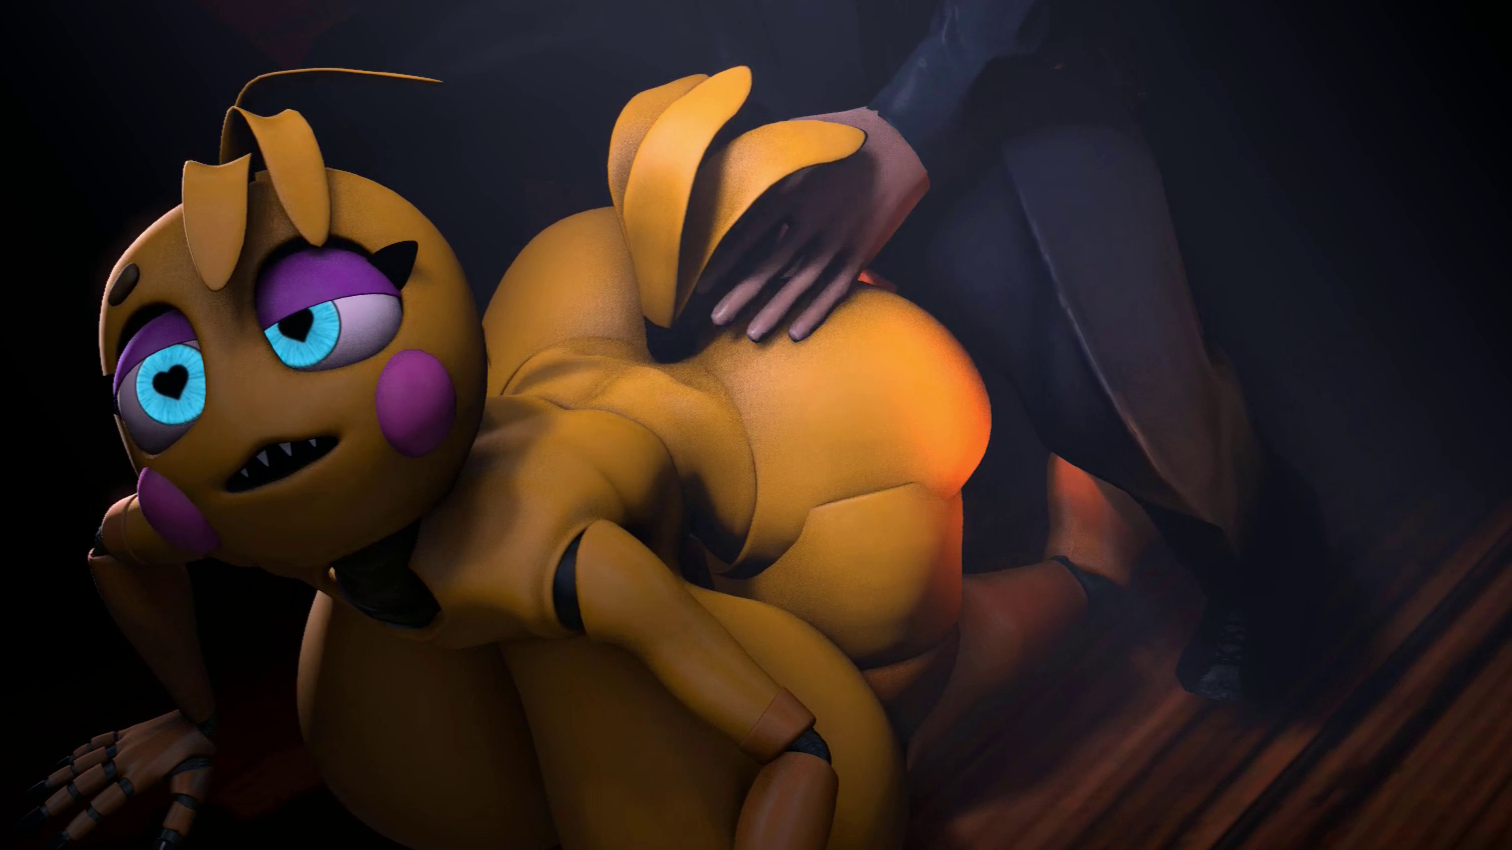 Fnaf chica give first person